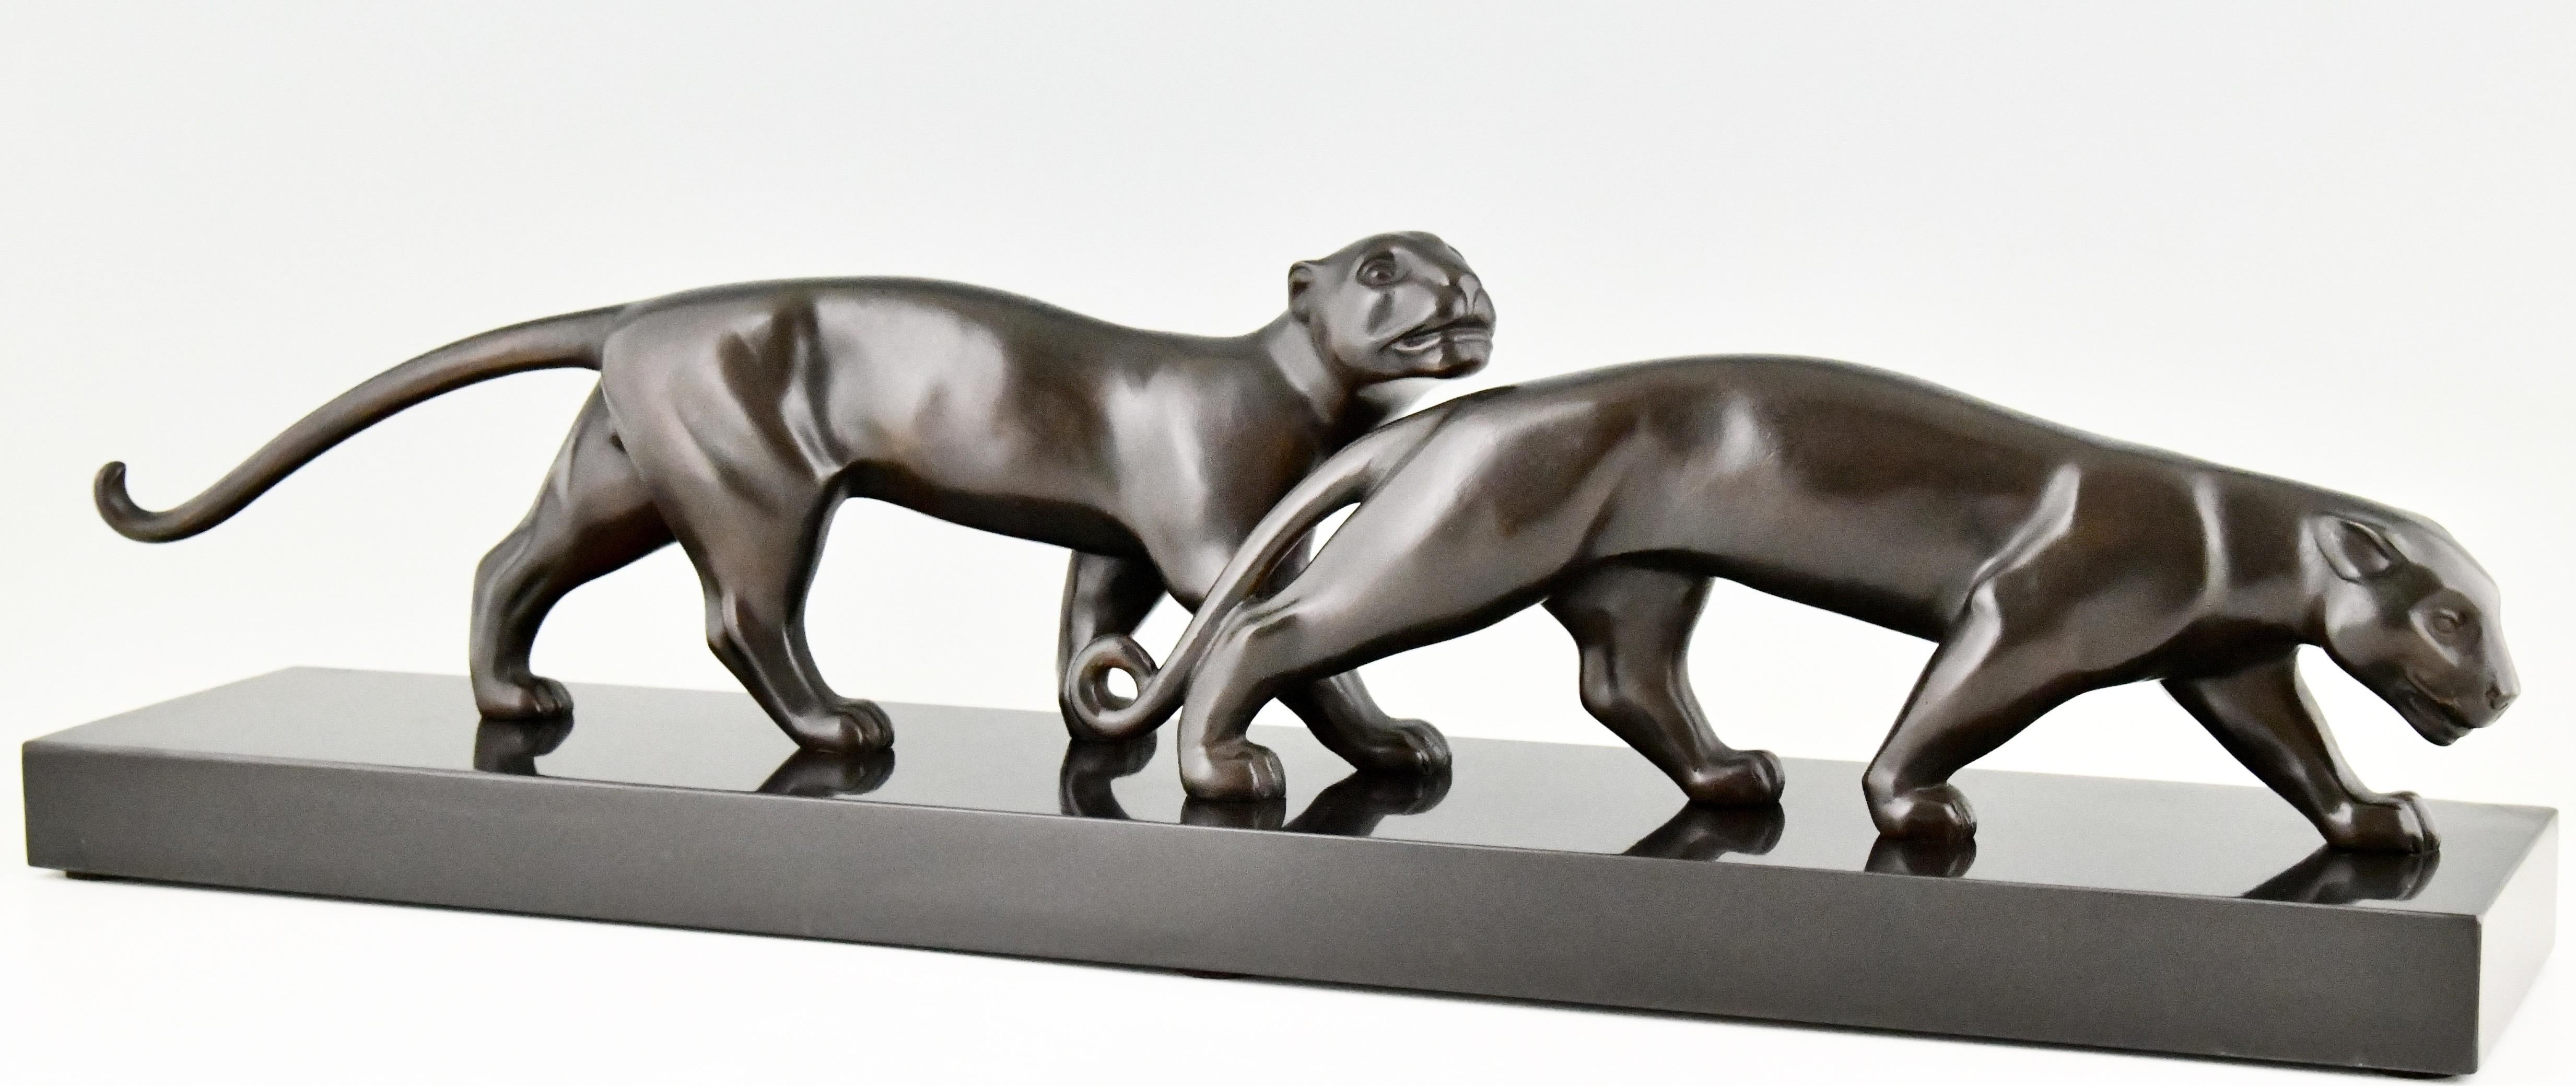 Art Deco bronze sculpture of two panthers Lucien Alliot. Black patinated bronze. Belgian Black marble base. France 1930

Literature:
Art Deco sculpture by Victor Arwas, Academy. Bronzes, sculptors and founders by H. Berman, Abage. Dictionnaire